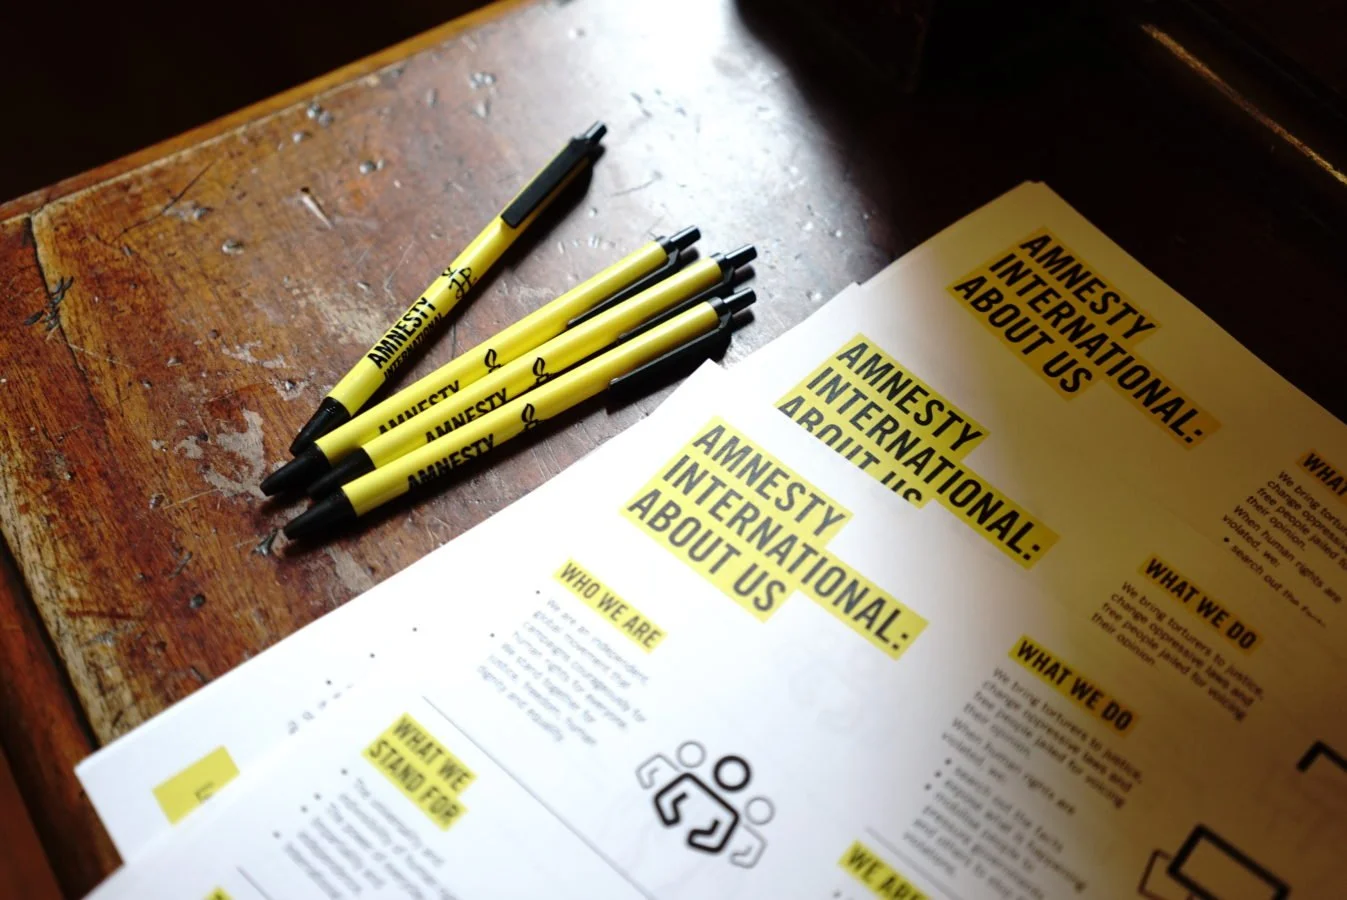 Flyer titled 'Amnesty International: About Us' on a desk with Amnesty branded pens